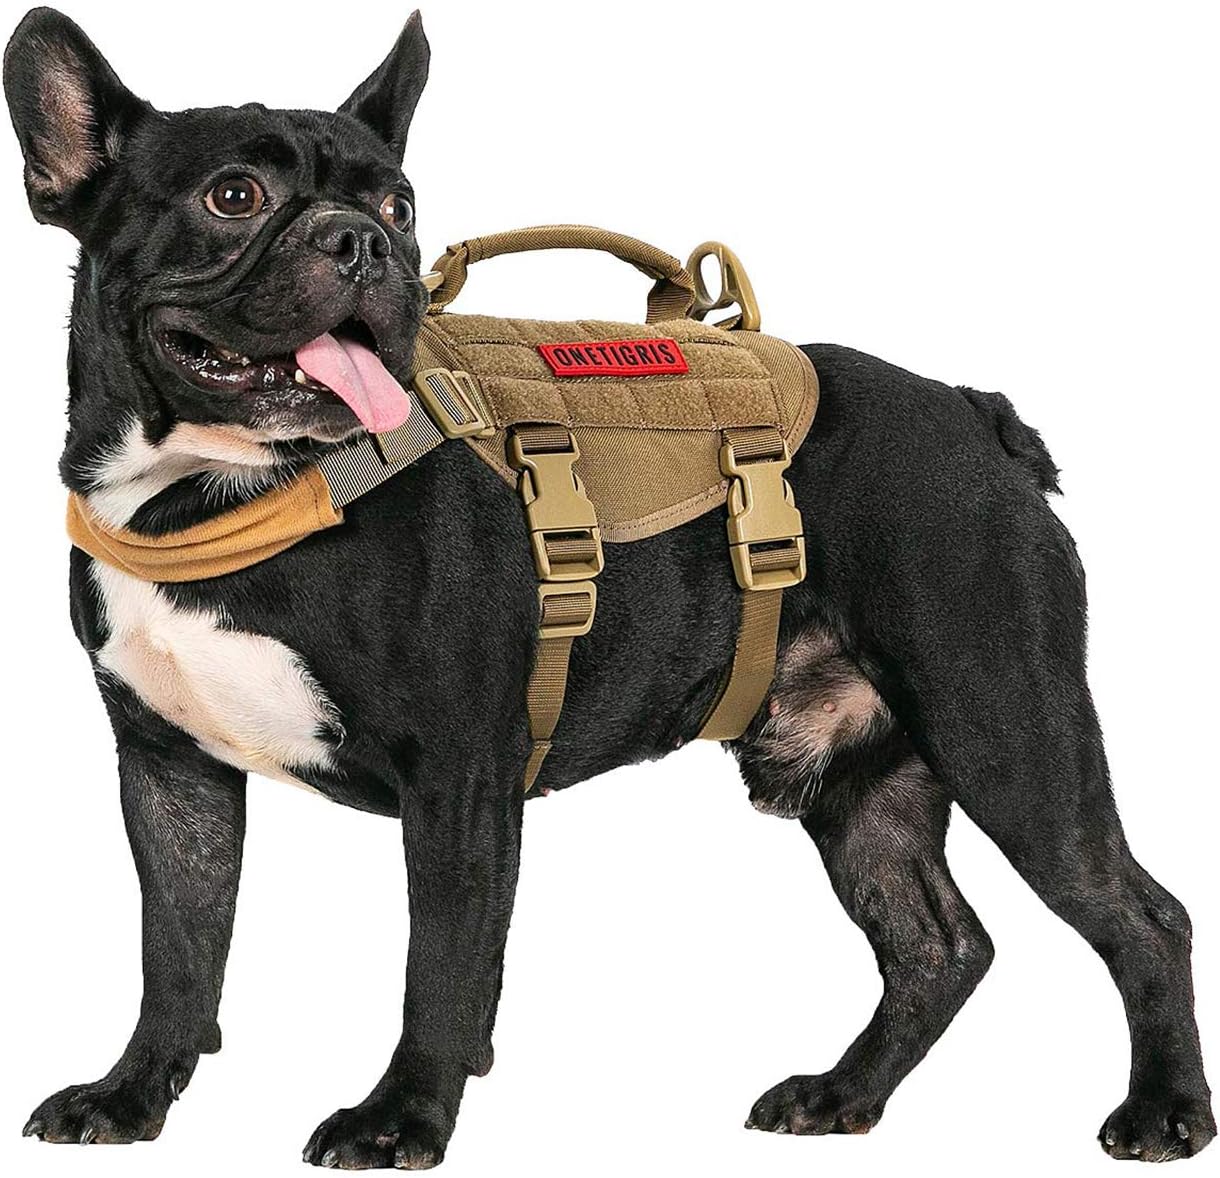 Get ready to take your furry friend on the ultimate outdoor adventure with the OneTigris Tactical Dog Harness! This high-quality military vest is specifically designed for small dogs, providing you with easy control during training sessions and walks. With its quick-release buckles, putting it on and taking it off is a breeze, ensuring both convenience and security. The harness is made of durable 1000D nylon, guaranteeing its strength and longevity. Not only is it functional, but it is also comfortable for your pup, thanks to the fleece padded front strap that prevents chafing and discomfort. And with adjustable straps, it can accommodate different body builds. Plus, the OneTigris tactical dog harness comes with a 1-year warranty, giving you peace of mind. Get ready for endless adventures with your four-legged companion! OneTigris Tactical Dog Harness,Puppy Harness with Handle, Military Vest for Small Dogs Outdoor Easy Control Training Walking Click to view the OneTigris Tactical Dog Harness,Puppy Harness with Handle, Military Vest for Small Dogs Outdoor Easy Control Training Walking. Why Consider This Product? If you're a dog owner looking for a reliable and durable harness for your furry friend, the OneTigris Tactical Dog Harness is definitely worth considering. This harness has numerous features and benefits that set it apart from others on the market. With its high-quality construction, comfortable fit, and easy on/off design, it's the perfect choice for daily walks, weekend hikes, and other outdoor activities with your small dog. One key reason to consider this product is its effectiveness in providing control and security without sacrificing comfort. The front slip-in design and UTX-duraflex quick-release buckles ensure easy on/off functionality while maintaining a secure fit. This means you'll have no trouble getting your pup ready for an adventure, whether it's a quick walk around the block or a rugged hike through the wilderness. Another reason to consider this harness is the added convenience of a handle. The small tactical dog harness is equipped with a sturdy handle on the back, allowing you to have better control over your dog when needed. This is especially useful in situations where you want to keep your dog close or have them follow your lead. Features and Benefits Quick Release Buckles for Easy On/Off The OneTigris Tactical Dog Harness features quick release buckles that allow for easy on/off without compromising security. This makes the harness perfect for everyday use and ensures that you and your furry friend can get out the door quickly and hassle-free. Front Slip-In Design The front slip-in design of this harness adds to its convenience and ease of use. No more struggling to fit your dog's paws through multiple straps. Simply slide the harness over your dog's head and you're good to go. Fleece Padded Front Strap To prevent chafing and discomfort, the harness is equipped with a fleece padded front strap. This ensures that your dog stays comfortable, even during longer walks or hikes. Adjustable Straps for Different Body Builds The OneTigris Tactical Dog Harness is suitable for small pets and comes with adjustable straps to accommodate different body builds. This means that even if your dog is still growing, you can adjust the harness to fit them perfectly and provide the necessary support and comfort. OneTigris Tactical Dog Harness,Puppy Harness with Handle, Military Vest for Small Dogs Outdoor Easy Control Training Walking Learn more about the OneTigris Tactical Dog Harness,Puppy Harness with Handle, Military Vest for Small Dogs Outdoor Easy Control Training Walking here. Product Quality OneTigris is known for manufacturing high-quality tactical gear, and their Tactical Dog Harness is no exception. Made from high-strength 1000D nylon, this harness is built to withstand the wear and tear of outdoor adventures. The durable construction ensures that it will last, even in the most rugged conditions. Furthermore, OneTigris offers a quality after-sale guarantee. With a 1-year warranty, if you're not satisfied with the harness, you can contact them at any time and they promise to reply within 24 hours. This gives you peace of mind and the assurance that you can use the product with confidence. What It's Used For Daily Walks The OneTigris Tactical Dog Harness is the perfect companion for daily walks. Its easy on/off design, adjustable straps, and comfortable fit make it an ideal choice for both you and your furry friend. Weekend Hikes Planning a weekend hike? This harness is a great option for outdoor adventures. Its durable construction and secure fit ensure that your dog is comfortable and safe throughout the hike. The added handle also comes in handy for maintaining control in different terrains. Other Outdoor Activities Whether it's a trip to the beach or a visit to the local park, the OneTigris Tactical Dog Harness is versatile enough to handle a variety of outdoor activities. Its quick release buckles and adjustable straps make it easy to adapt to different environments and keep your dog secure. OneTigris Tactical Dog Harness,Puppy Harness with Handle, Military Vest for Small Dogs Outdoor Easy Control Training Walking Product Specifications Specification Measurement Neck Girth 11"-17" Chest Girth 15"-22" Back Length 8.6" Waist Girth 15"-22" (Insert table visualization here) Who Needs This This tactical dog harness is perfect for small dog owners who love to engage in outdoor activities with their furry companions. Whether you have an active pup who enjoys long walks or a small dog that needs a bit more control, this harness is designed to meet your needs. OneTigris Tactical Dog Harness,Puppy Harness with Handle, Military Vest for Small Dogs Outdoor Easy Control Training Walking Pros and Cons Pros: Quick release buckles for easy on/off Front slip-in design for convenience Fleece padded front strap for comfort Adjustable straps for different body builds Sturdy handle for better control Cons: May not be suitable for larger dogs FAQ’s (Question) Is this harness suitable for puppies? (Answer) Yes, this harness is suitable for puppies as it has adjustable straps to accommodate their growing bodies. (Question) Is the handle strong enough to control a large dog? (Answer) This harness is specifically designed for small dogs, so we recommend selecting a different harness from OneTigris' range if you have a larger dog. OneTigris Tactical Dog Harness,Puppy Harness with Handle, Military Vest for Small Dogs Outdoor Easy Control Training Walking What Customers Are Saying Customers rave about the OneTigris Tactical Dog Harness, praising its durability and comfort. Many customers appreciate the easy on/off design and the convenience of the handle. Dog owners have found this harness to be a game-changer in terms of control and security during walks and hikes. Overall Value Considering its durable construction, comfort, and convenience, the OneTigris Tactical Dog Harness offers great value for small dog owners. Its quality materials and adjustable straps ensure a long-lasting and secure fit for your furry friend. Plus, with the added handle, you'll have better control in various outdoor situations. Tips and Tricks For Best Results Before using the harness, make sure to adjust the straps to properly fit your dog's body. Use positive reinforcement training techniques to help your dog associate the harness with positive experiences. Regularly inspect the harness for any signs of wear and tear and replace if necessary. Final Thoughts Product Summary The OneTigris Tactical Dog Harness is a high-quality and durable harness designed for small dogs. Its quick release buckles, front slip-in design, fleece padded front strap, and adjustable straps make it comfortable and secure. The added handle provides better control during walks and hikes, making it the perfect choice for outdoor adventures. Final Recommendation If you're looking for a reliable and comfortable harness for your small dog, the OneTigris Tactical Dog Harness is a top contender. With its durable construction, easy on/off design, and adjustable straps, it provides the perfect balance of security and comfort. Give your furry friend the best experience during walks and outdoor activities with this exceptional harness. Learn more about the OneTigris Tactical Dog Harness,Puppy Harness with Handle, Military Vest for Small Dogs Outdoor Easy Control Training Walking here. Disclosure: As an Amazon Associate, I earn from qualifying purchases.